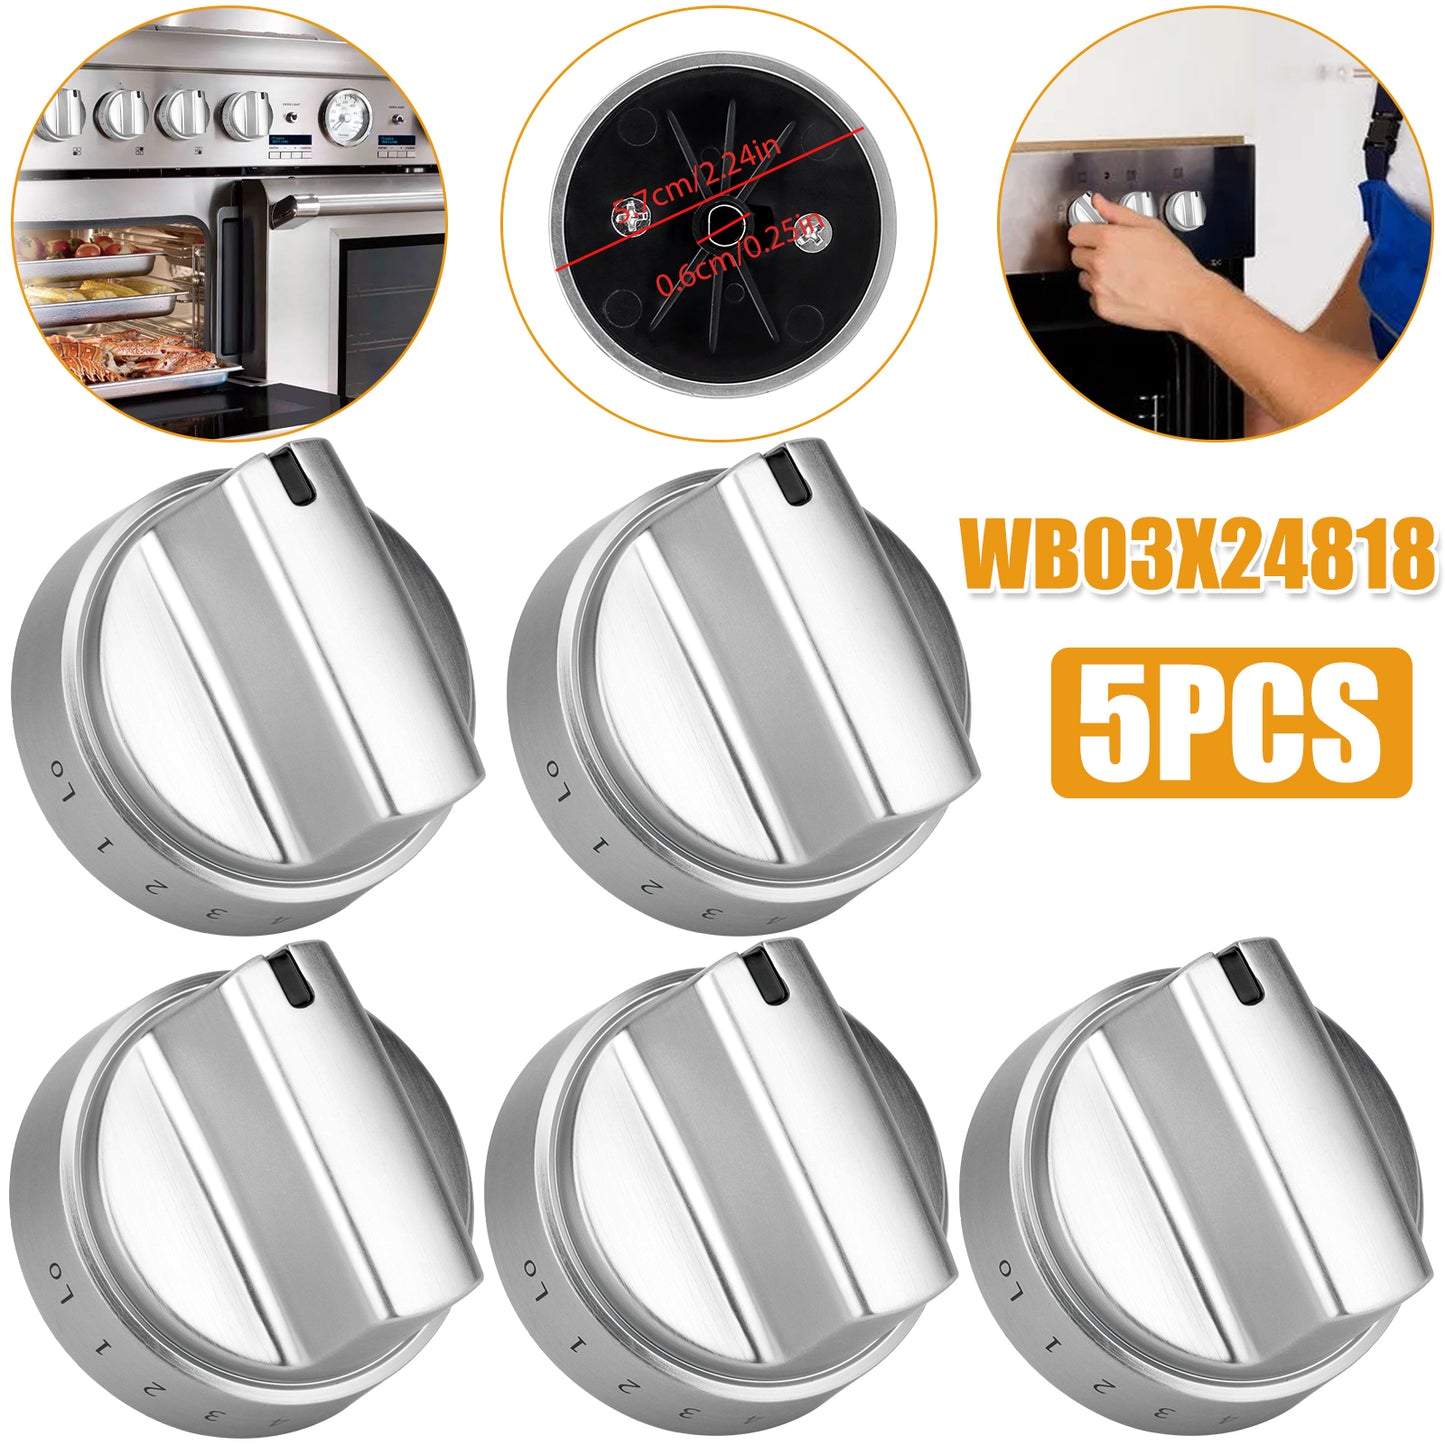 5PCS Gas Stove Knobs for GE Ranges - Durable Metal and ABS Plastic - Easy Installation